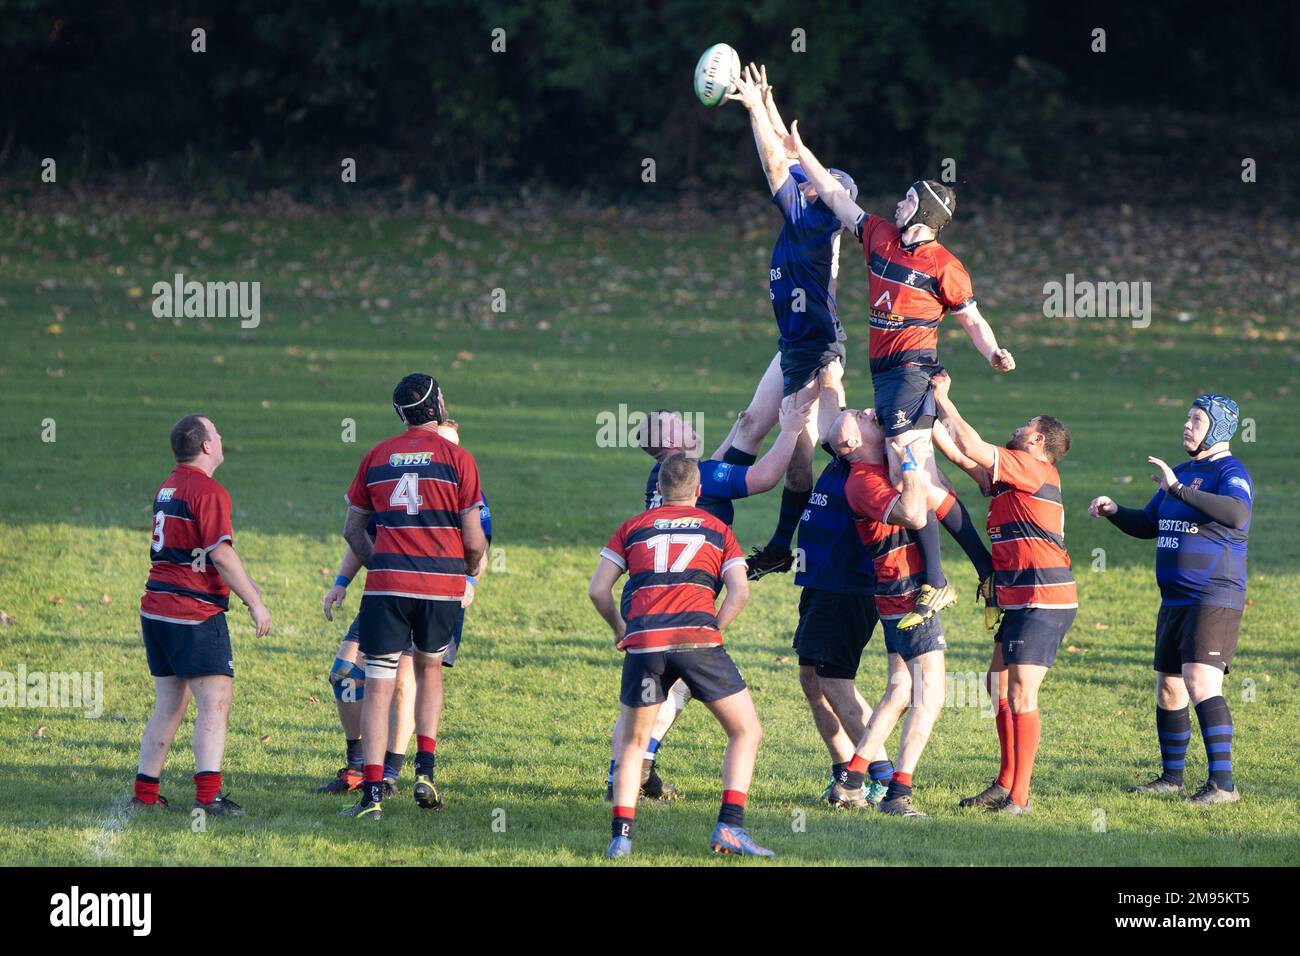 rugby game, team sport Stock Photo